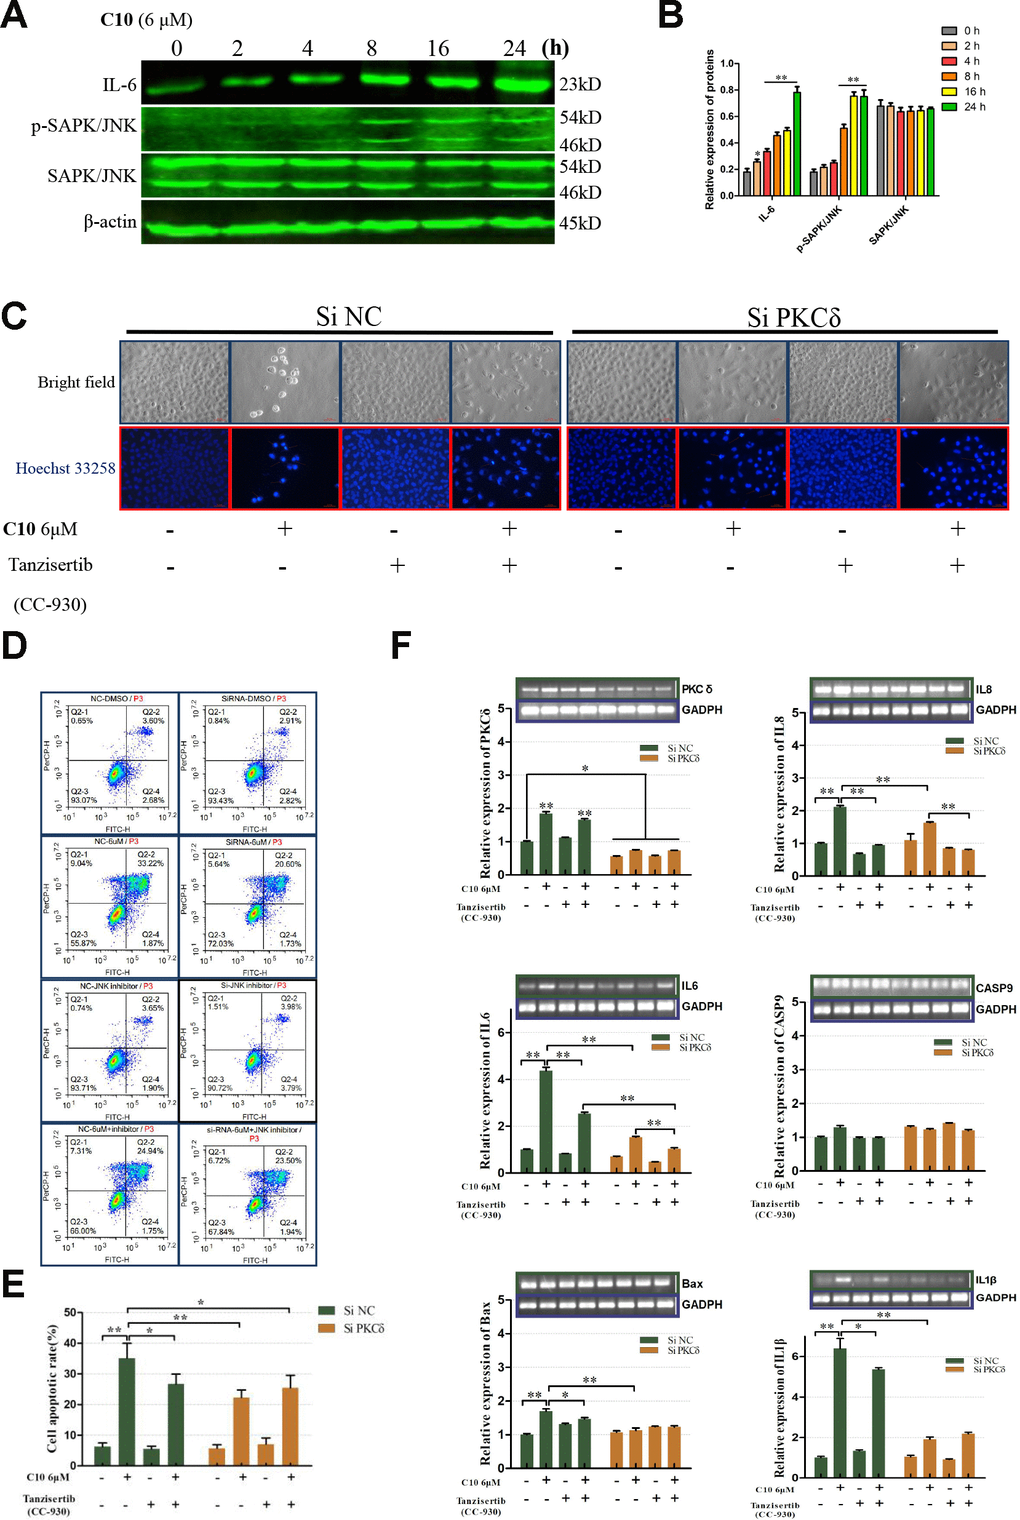 PKCδ induced PCD by activating JNK signaling in C10-treated PC3 cells. (A, B) Western blot of PC3 cells treated for the indicated times (0, 2, 4, 8, 16 or 24 h) with C10. IL-6, p-SAPK/JNK and SAPK/JNK antibodies were used. (C) Cultured PC3 cells were treated with C10 in the presence of different inhibitors (siPKCδ and the JNK-specific inhibitor Tanzisertib [CC-930]) for 24 h. The cells were then stained with Hoechst 33258 and photographed using a fluorescence microscope (magnification ×200, scale bar: 100 μm). (D, E) Cultured PC3 cells were stained with annexin-V-FITC and PI for flow cytometry analysis. (F) The mRNA levels of PKCδ, Caspase-9, IL-6, IL-8, IL-1β and Bax were measured by qRT-PCR. All data shown are representative of three independent experiments. Data are shown as the mean ± SD. *P P 